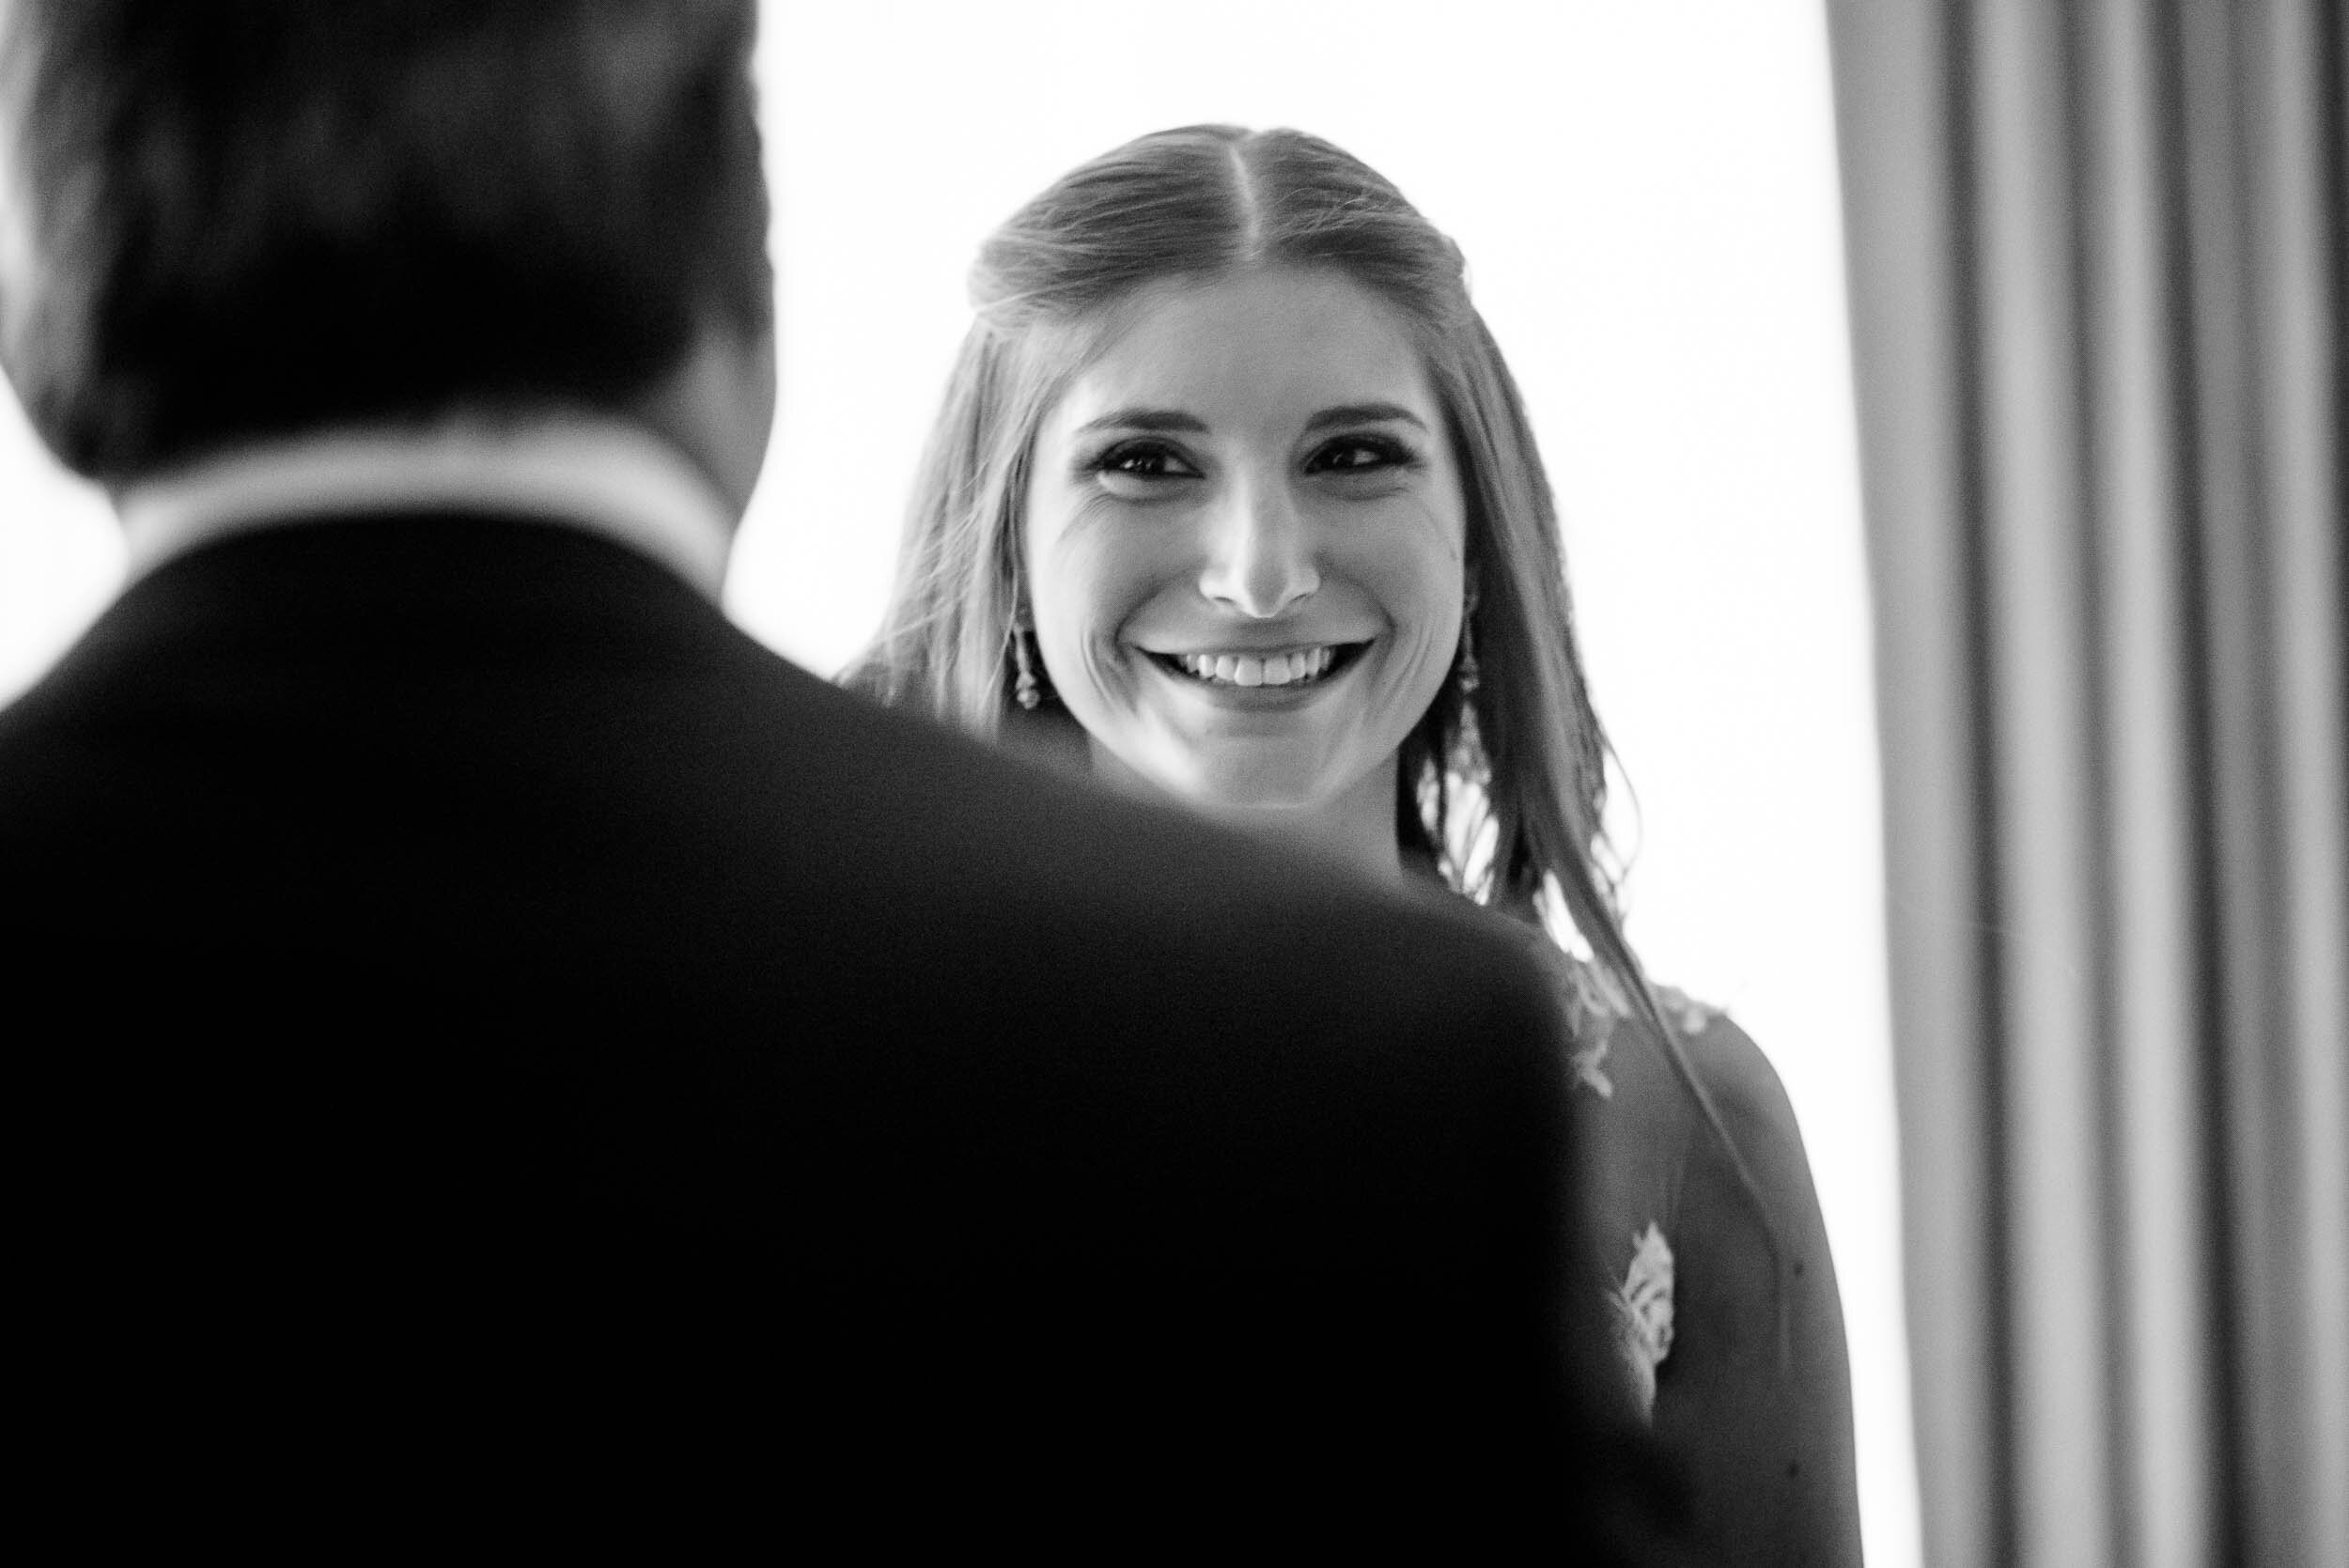 Bride first look with her dad: Ravenswood Event Center Chicago wedding captured by J. Brown Photography.  